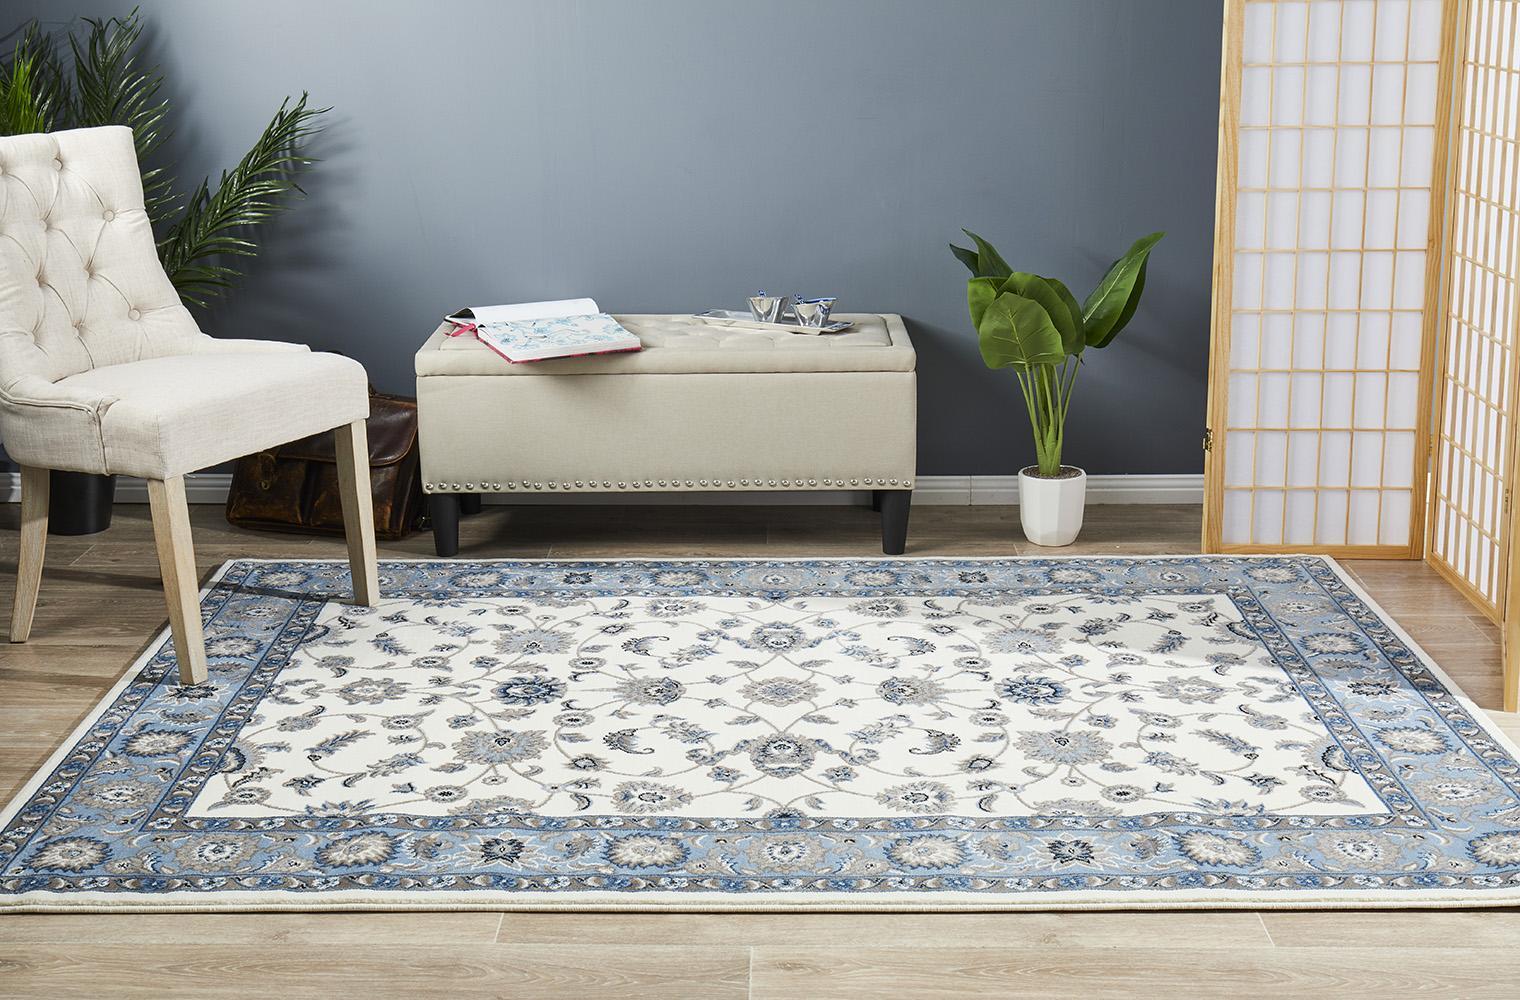 Rug Culture Classic Runner White with Blue Border 300x80cm